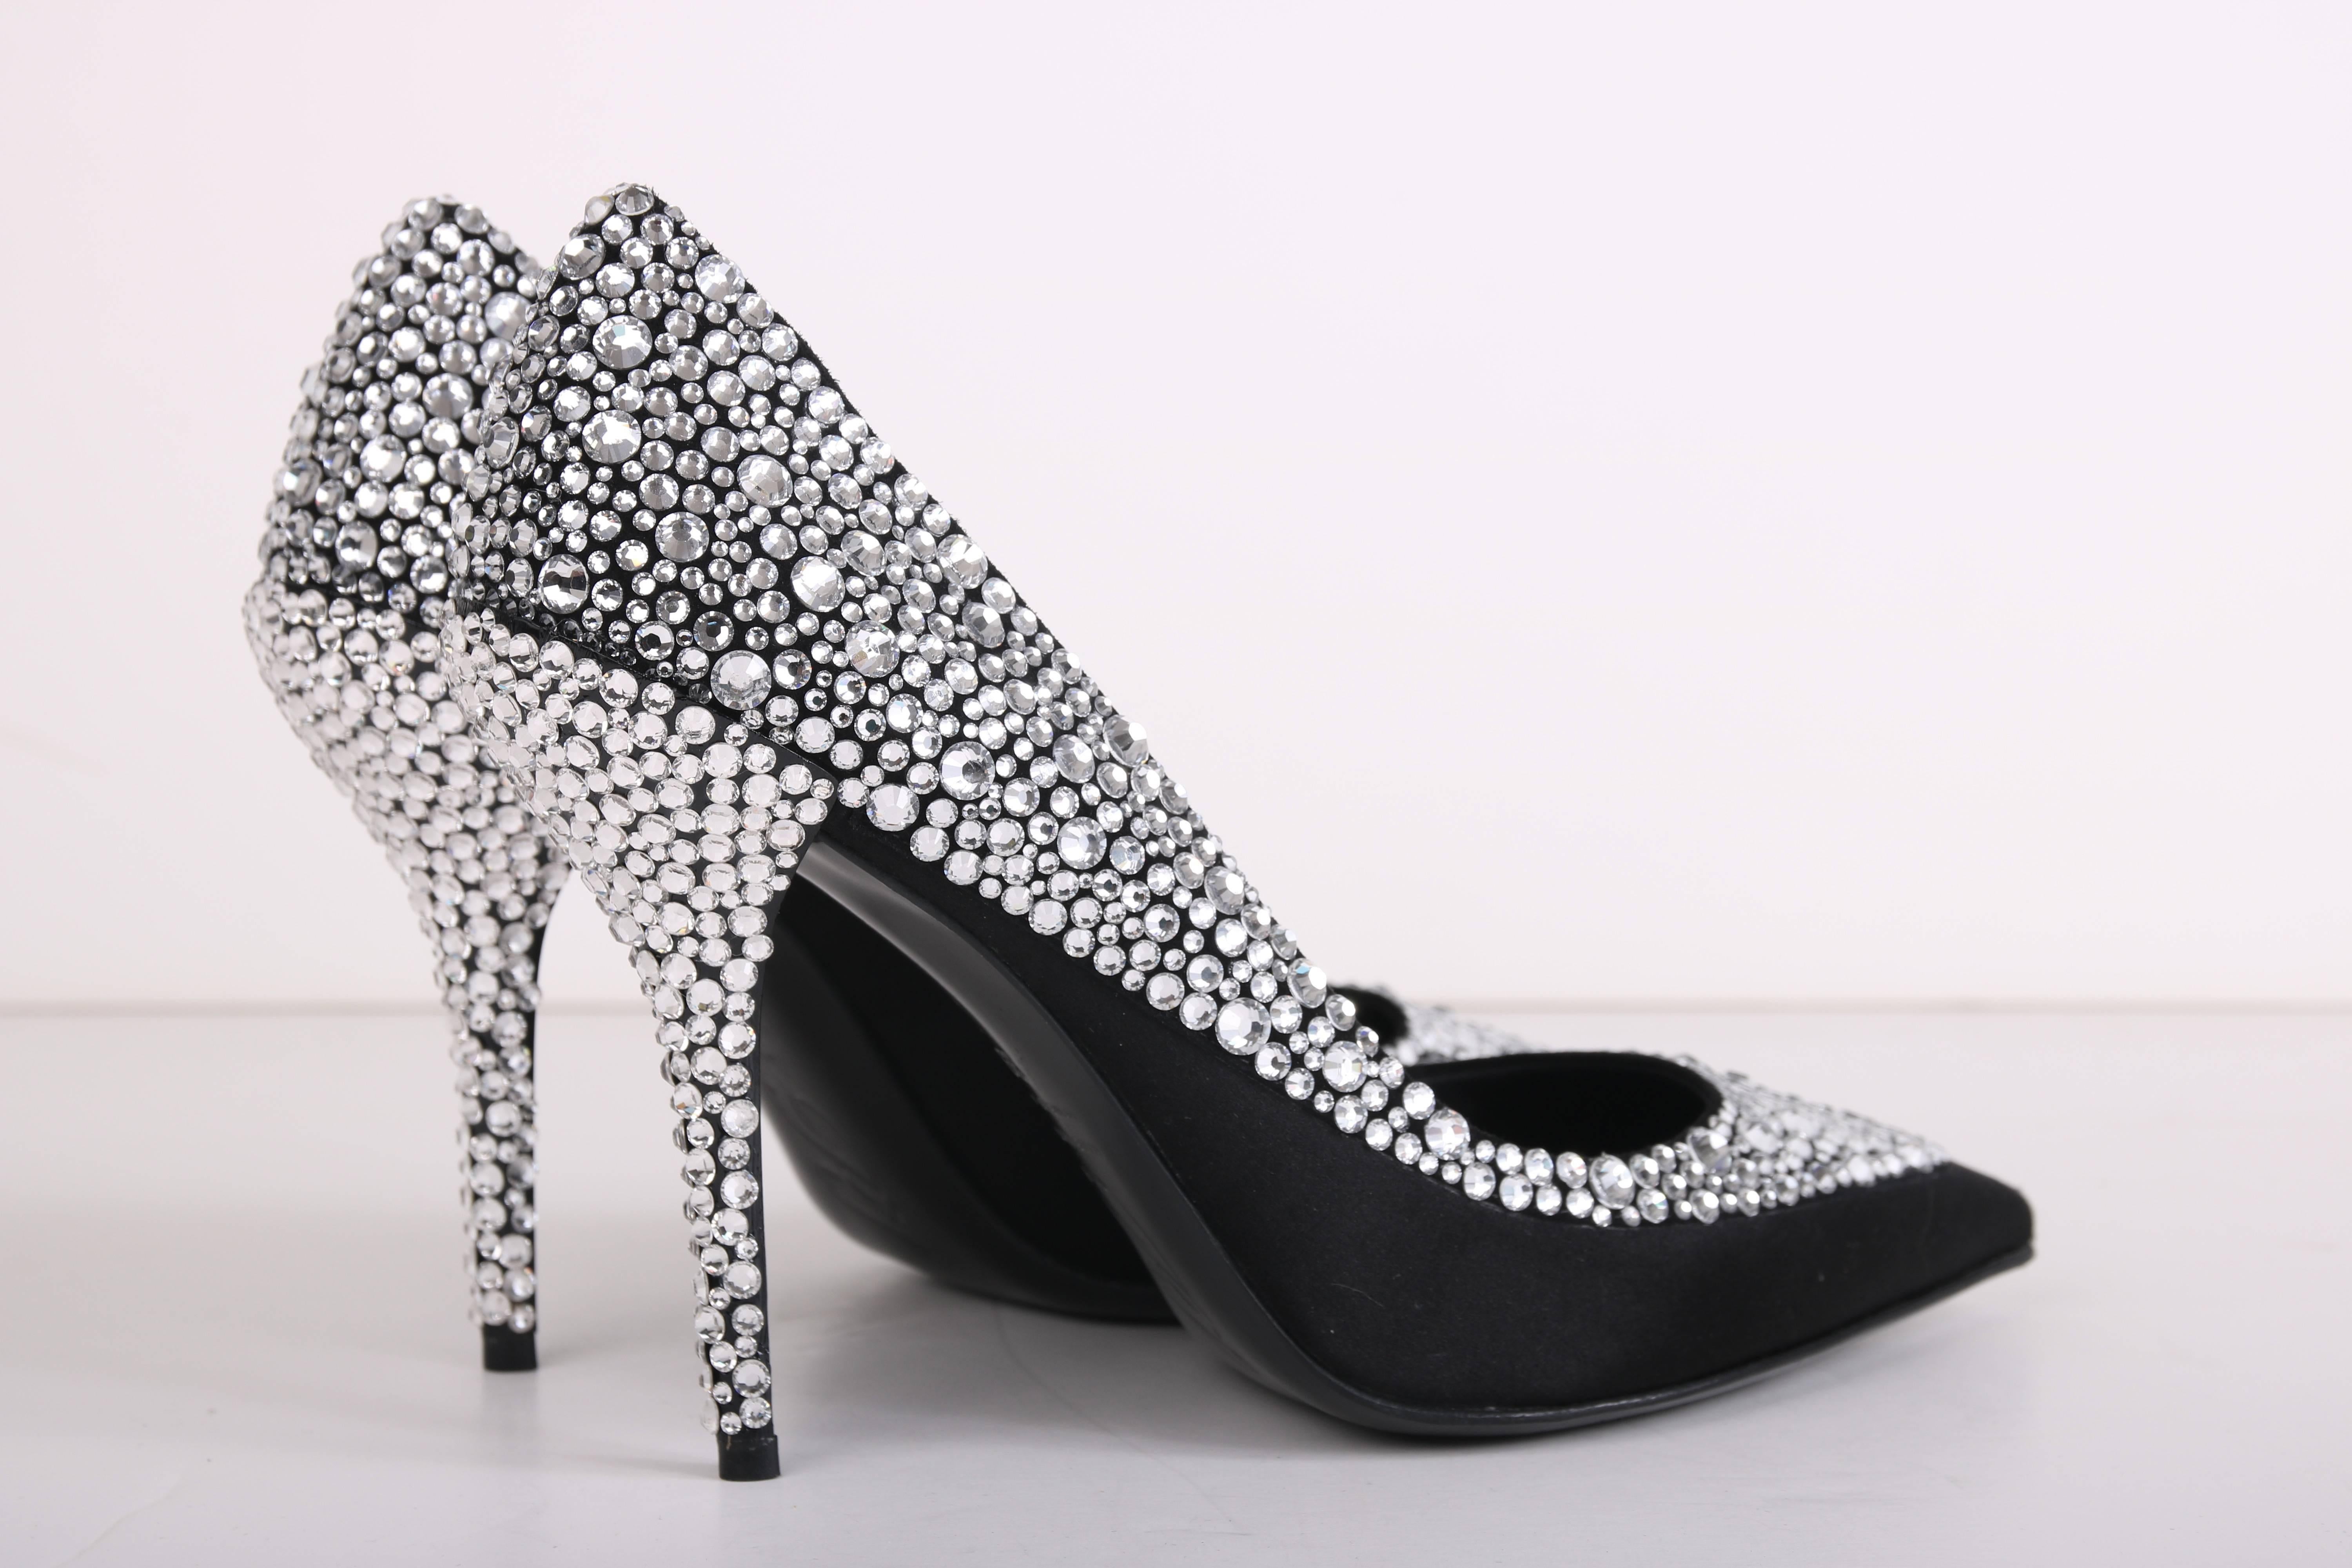 Roger Vivier Black Satin Crystal Encrusted Stiletto In Excellent Condition For Sale In Studio City, CA